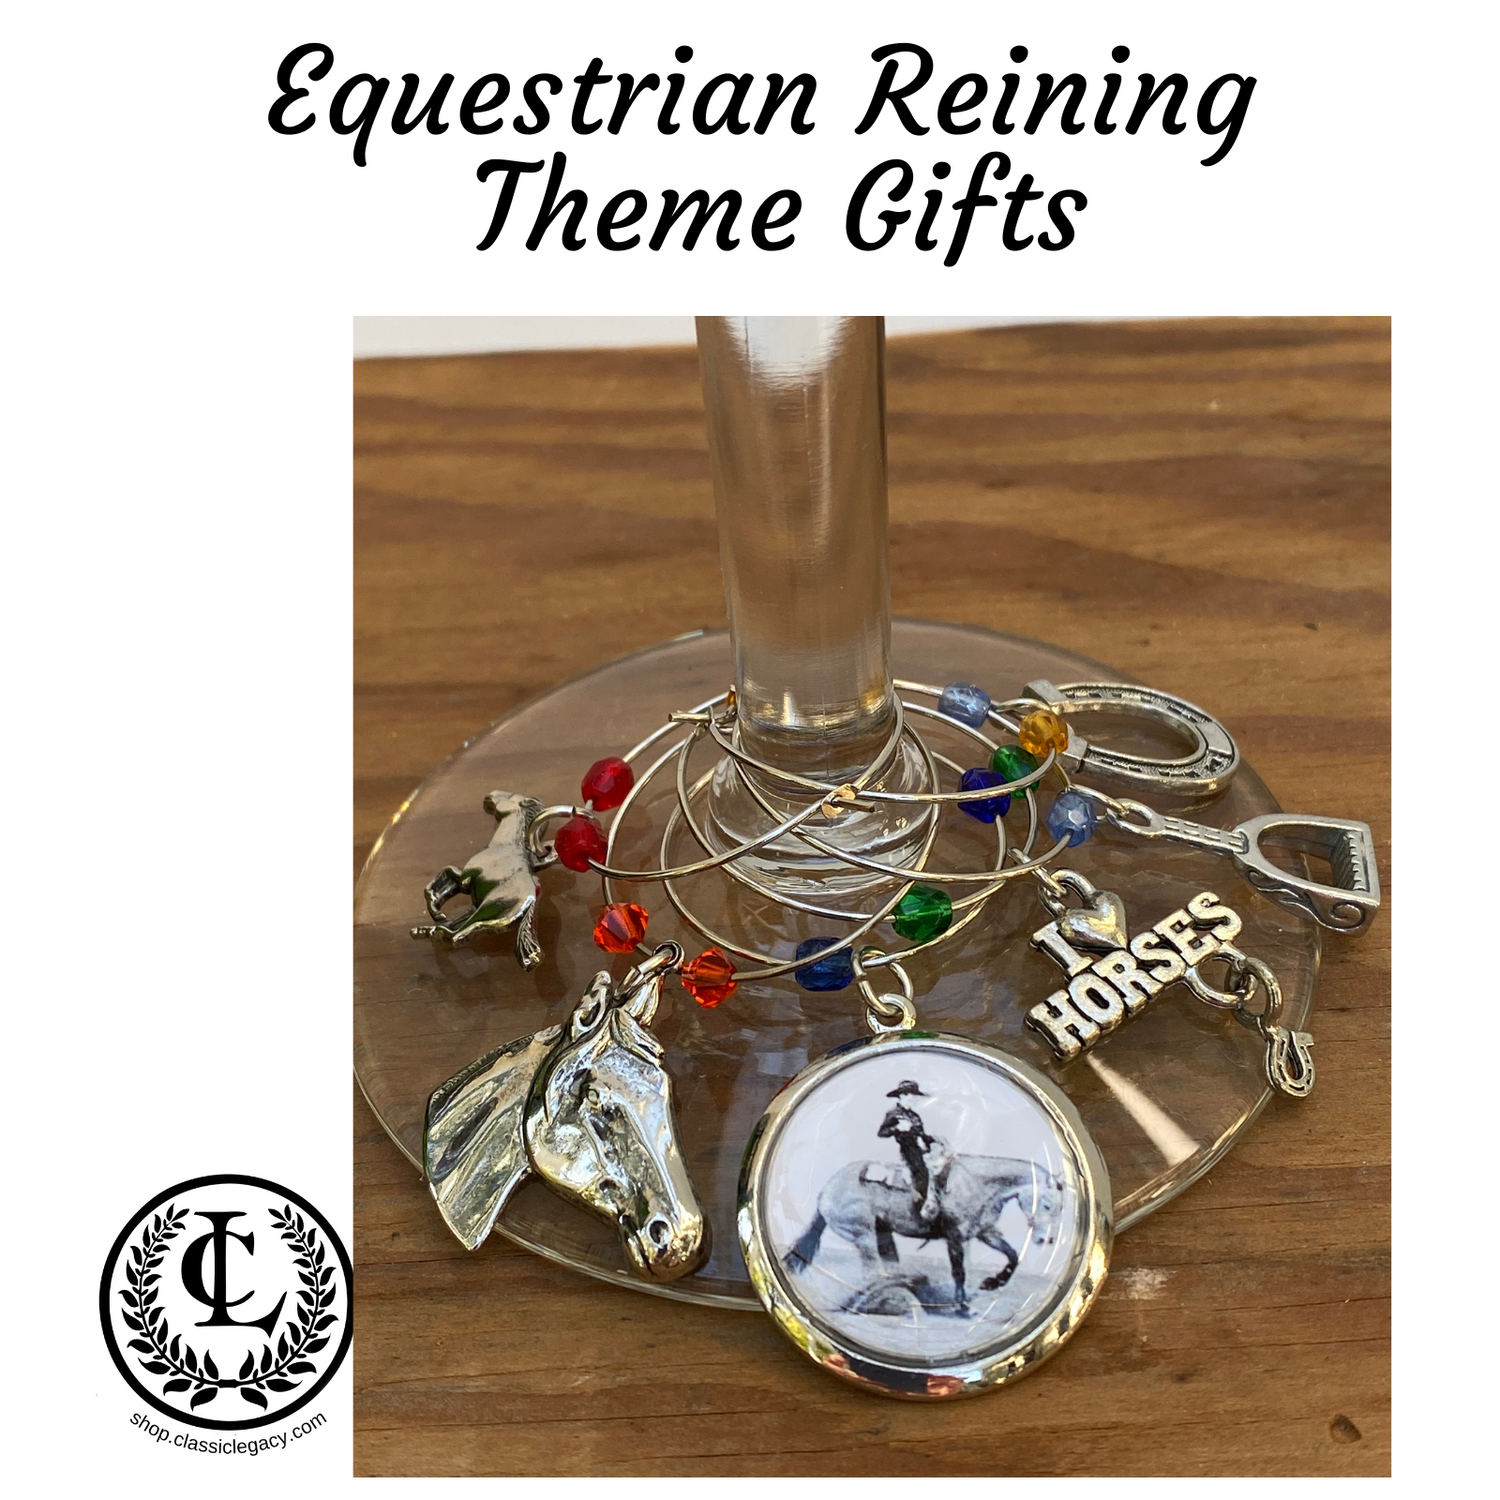 Reining Horse Gifts